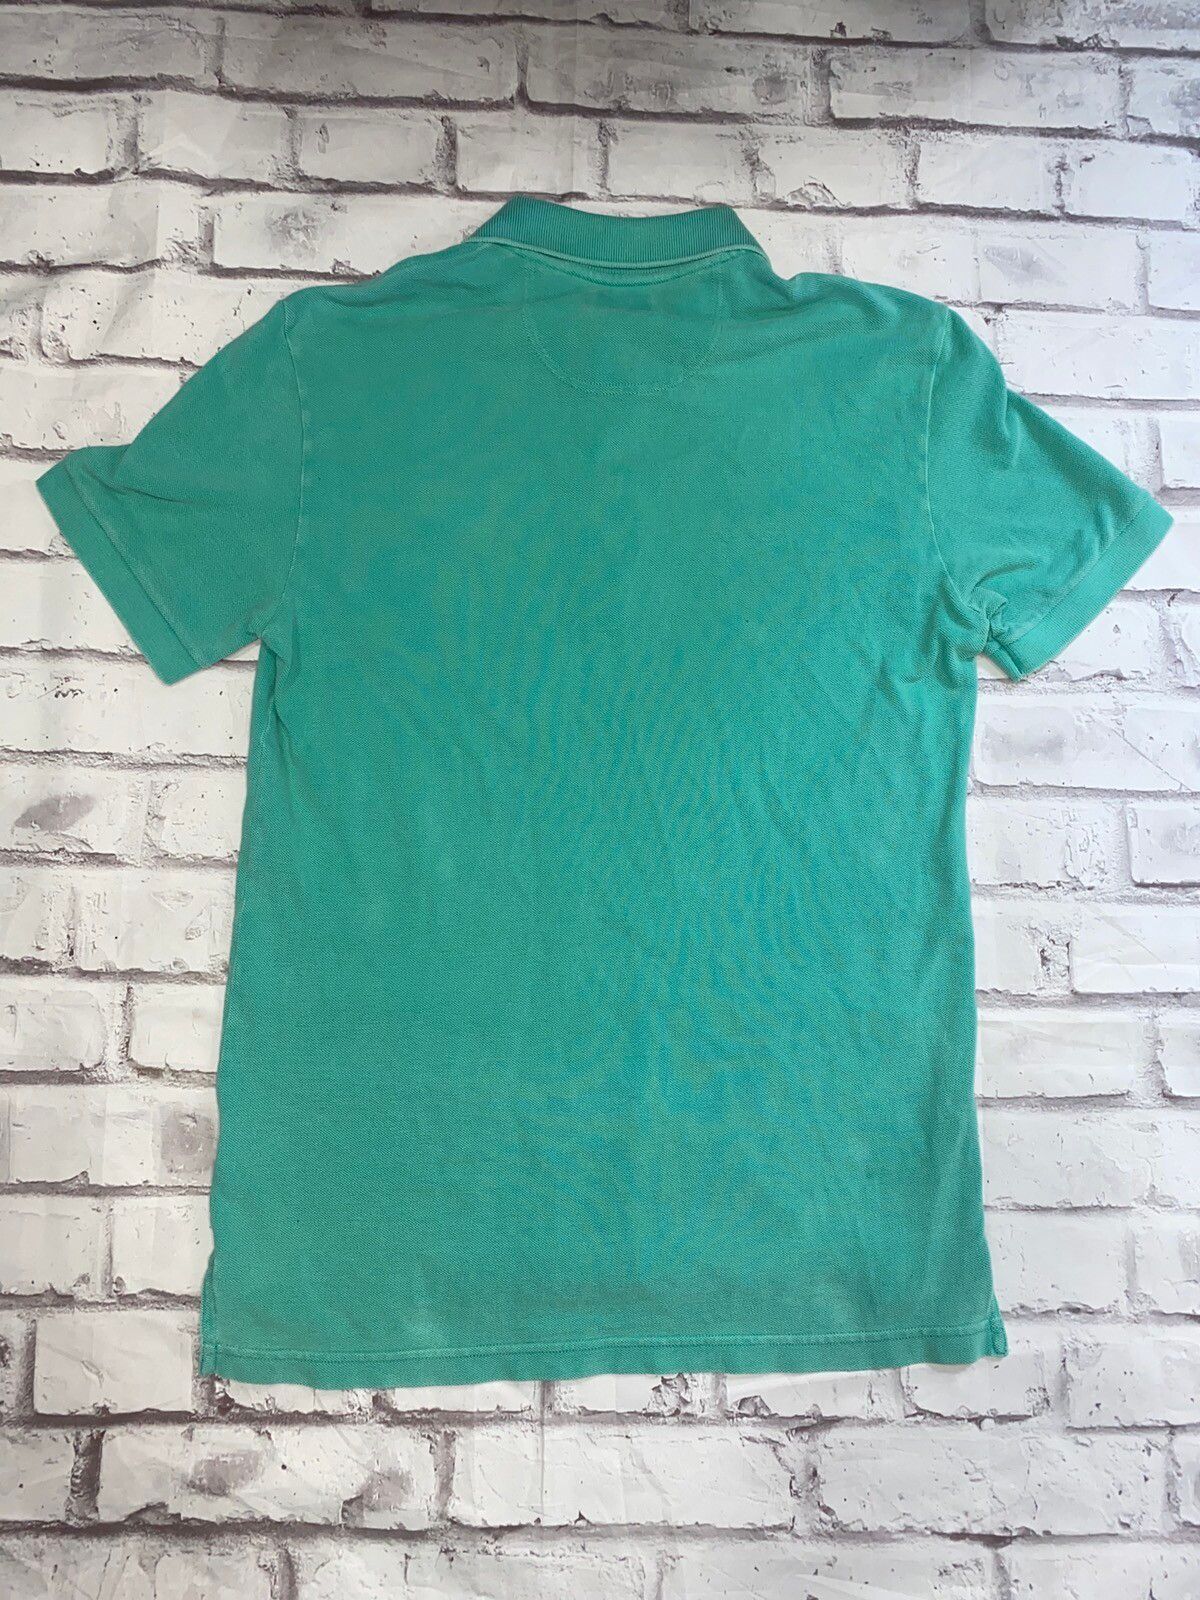 Lacoste Lacoste Vintage Washed Polo Medium Size US M / EU 48-50 / 2 - 2 Preview